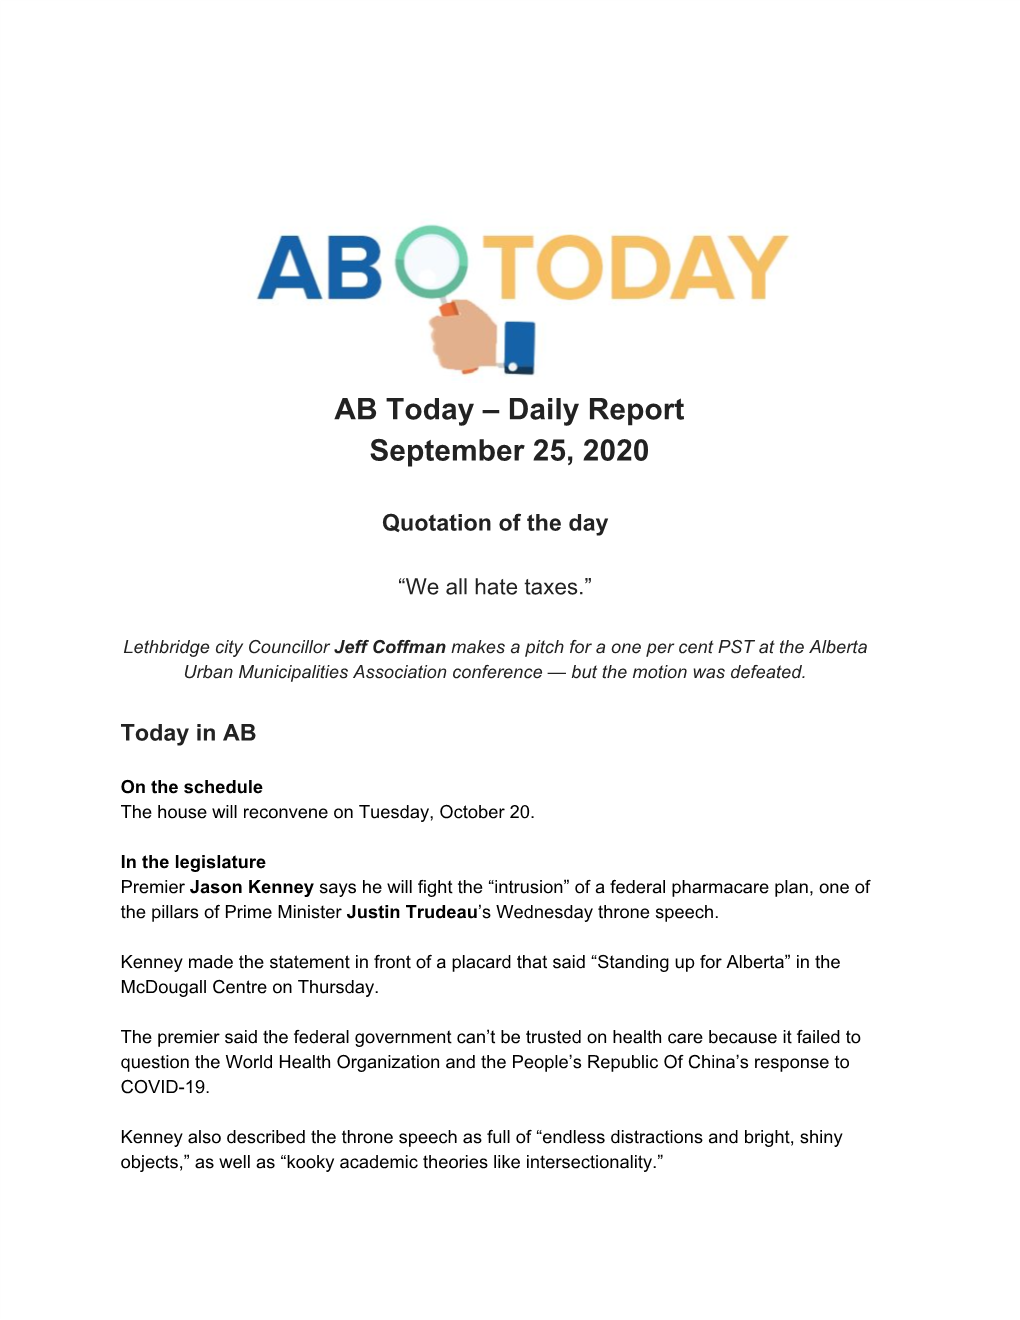 AB Today – Daily Report September 25, 2020